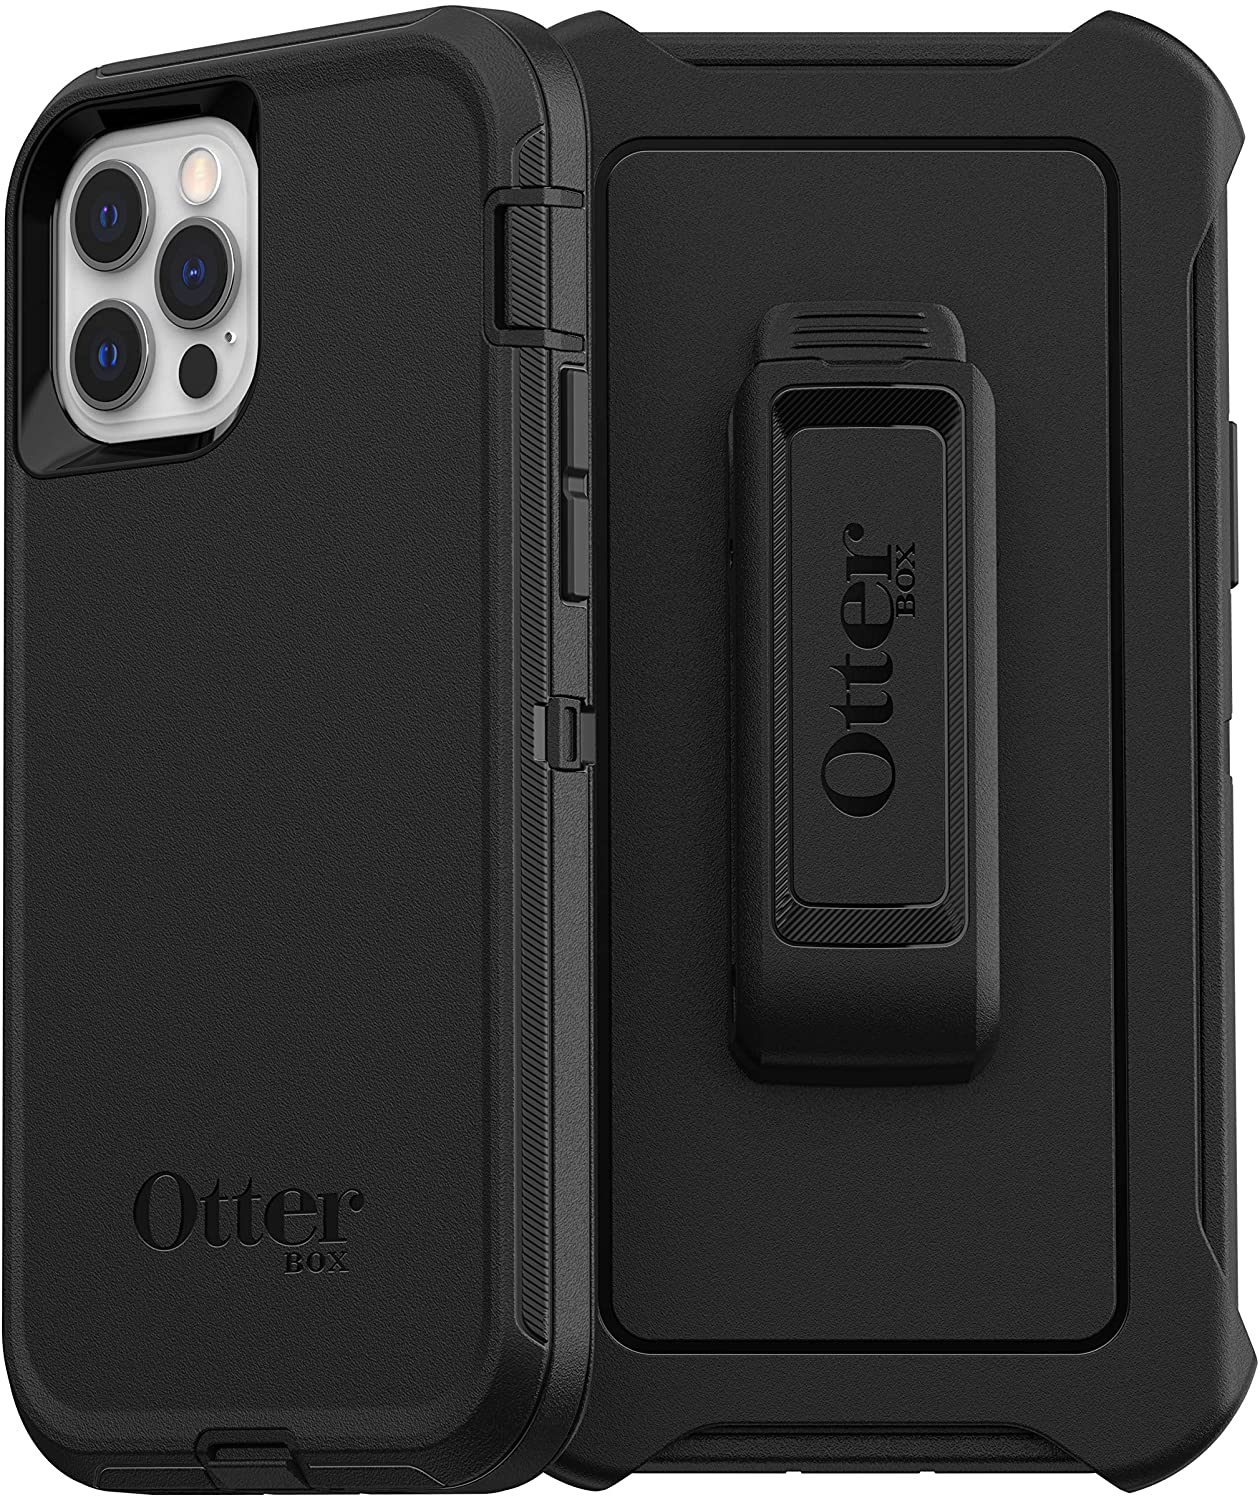 OtterBox DEFENDER SERIES Case &amp; Holster for iPhone 12 / iPhone 12 Pro - Black (Certified Refurbished)